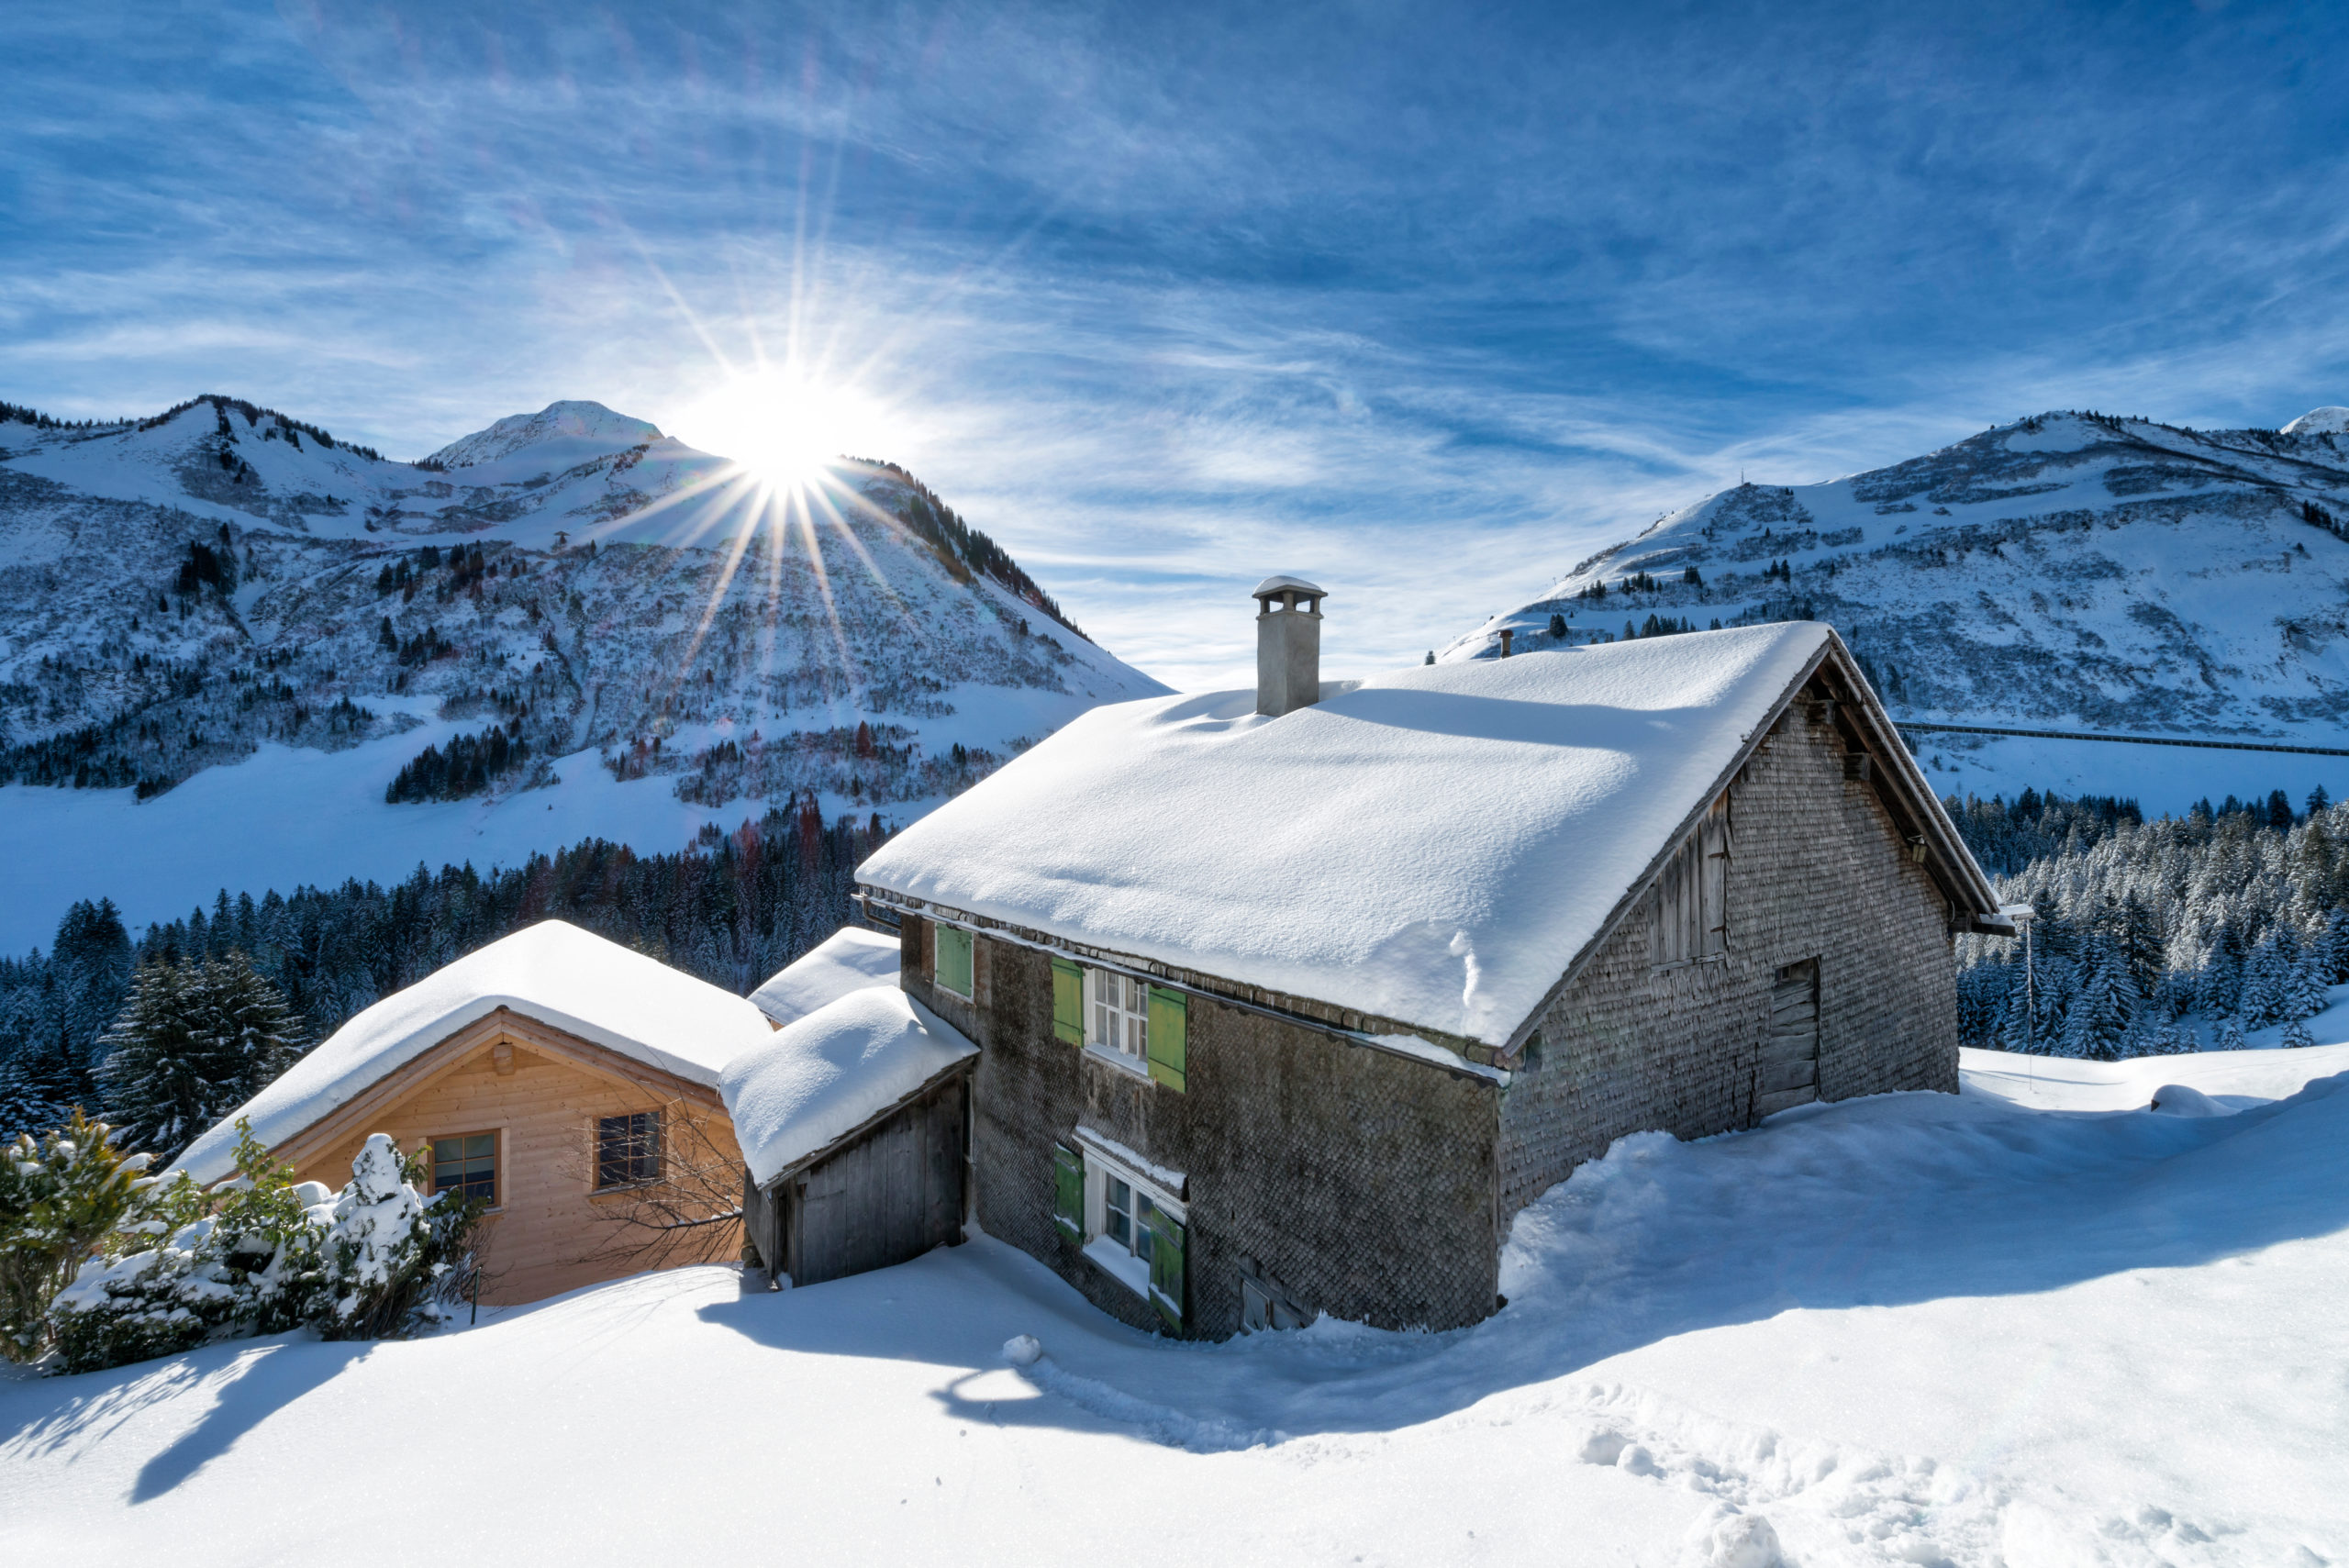 Property insurance & risk management for ski lodges, resorts, and alpine lodges. Tailored coverage for your business needs.